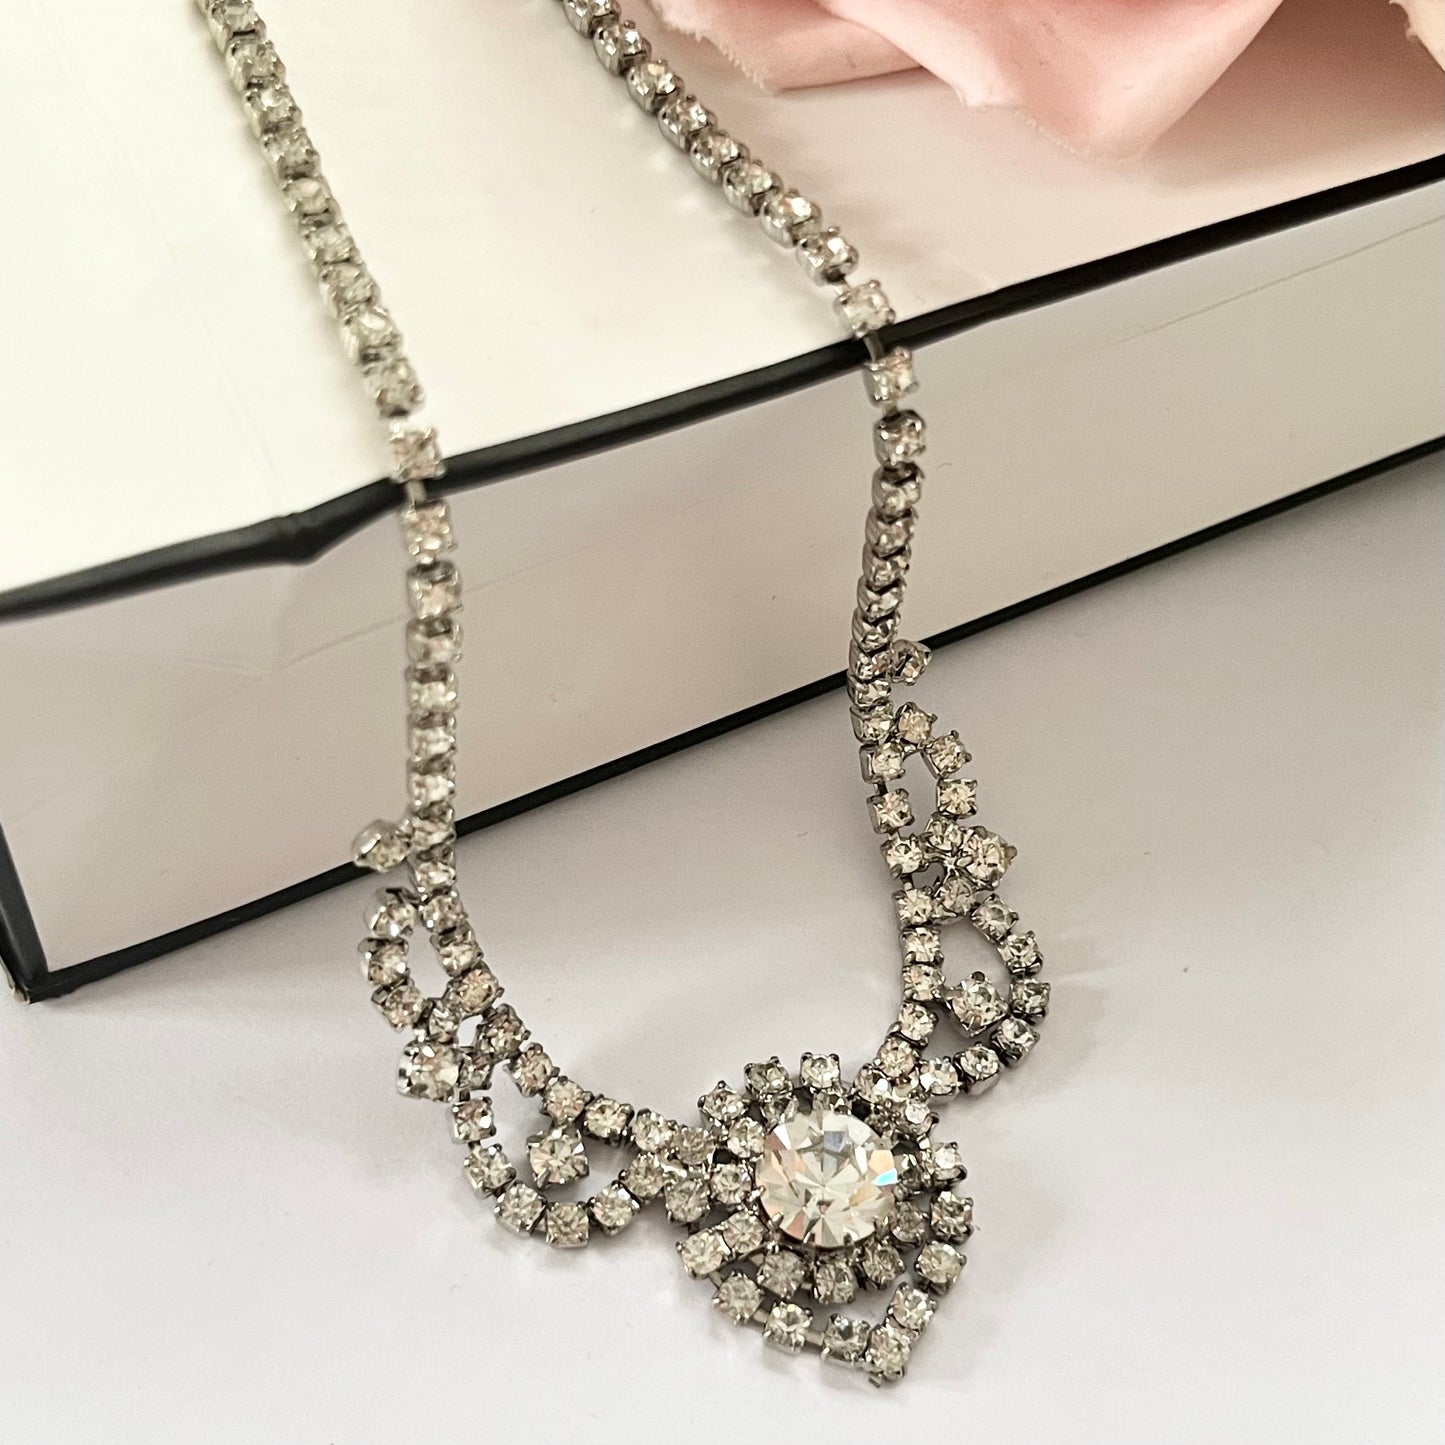 1950s Beautiful Sparkly Silver Tone Statement Necklace